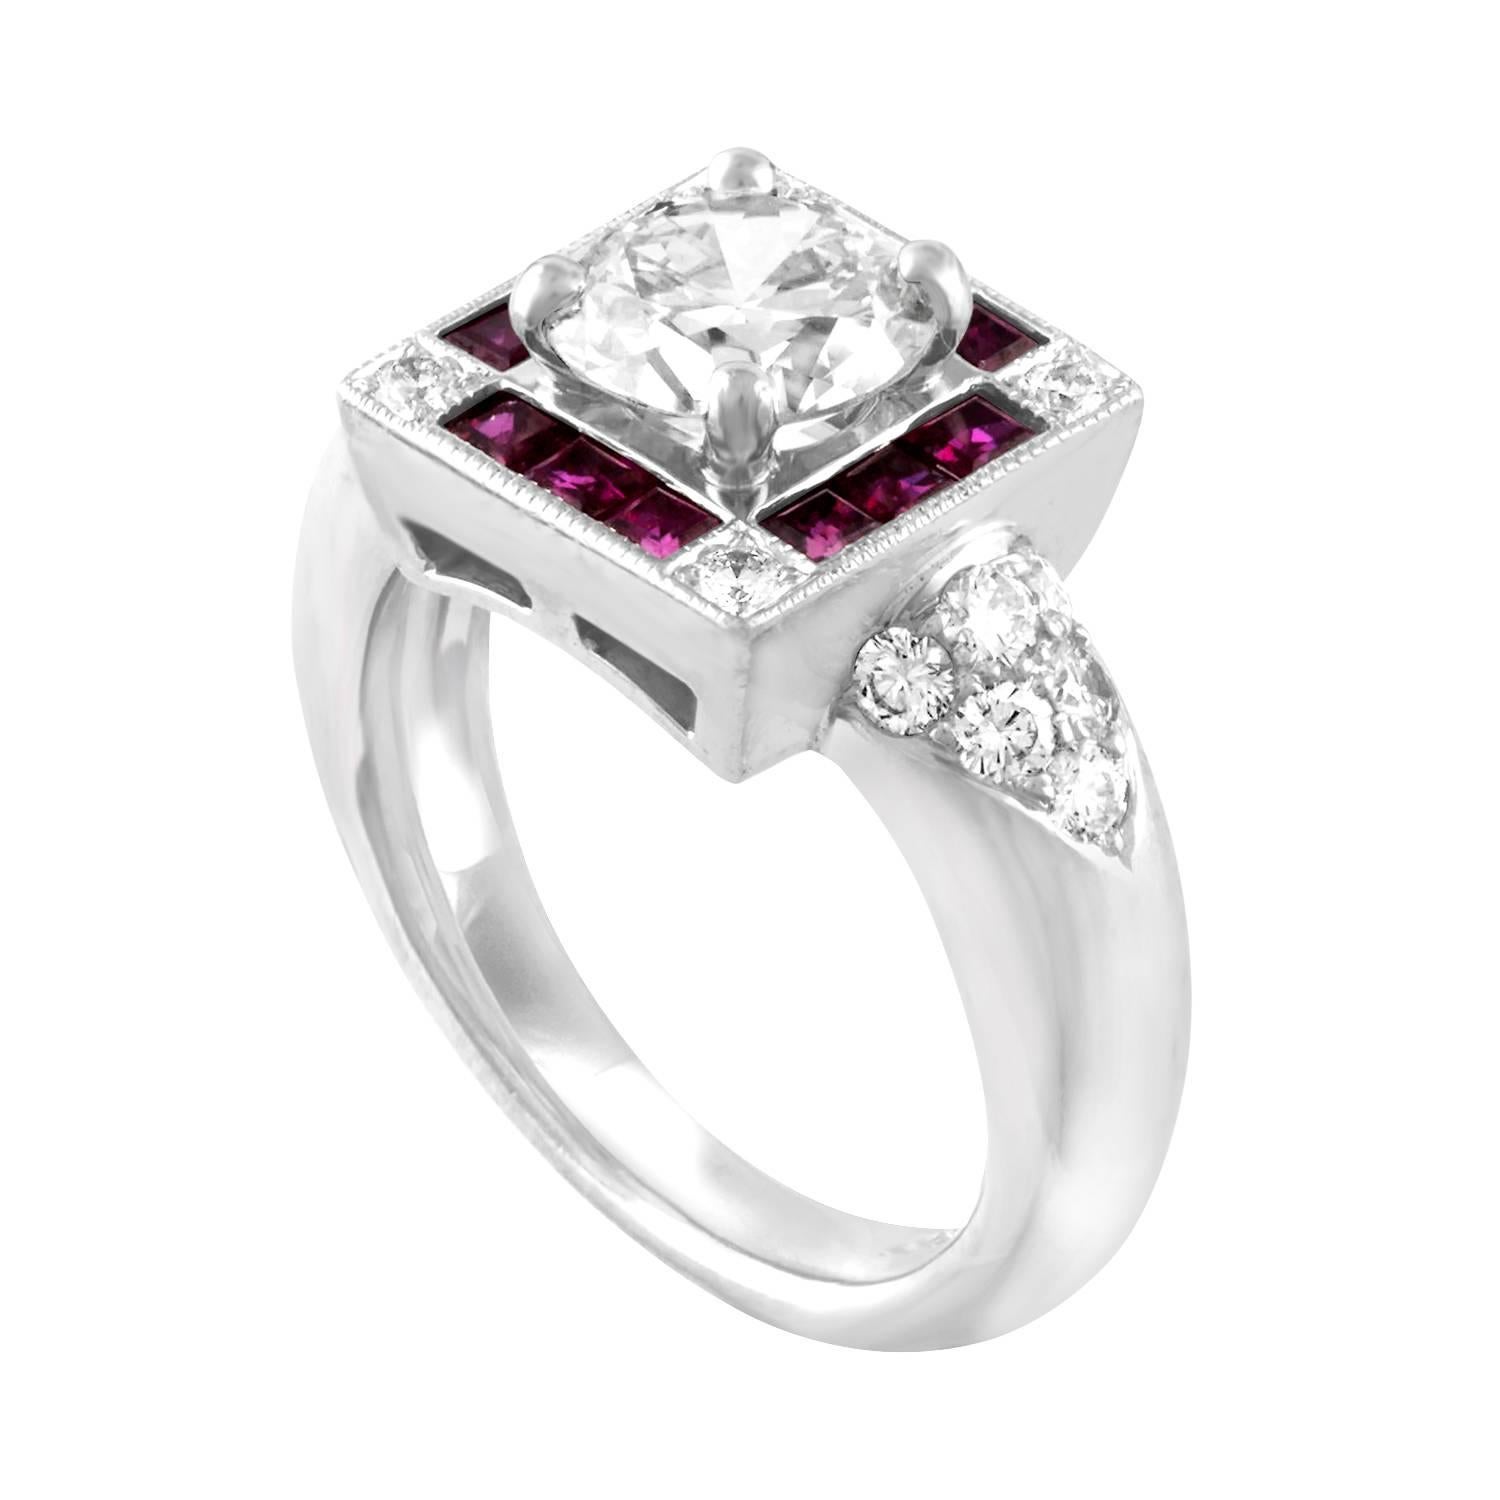 Art Deco Revival Ring
The ring is Platinum 950
The center store 1.48 Carats L VS1
The center stone is GIA certified
There are 0.70 Carats in Small Diamonds E/F VVS
There are 0.60 Carats in Ruby
The ring is a size 5.75, sizable
The ring weighs 11.1